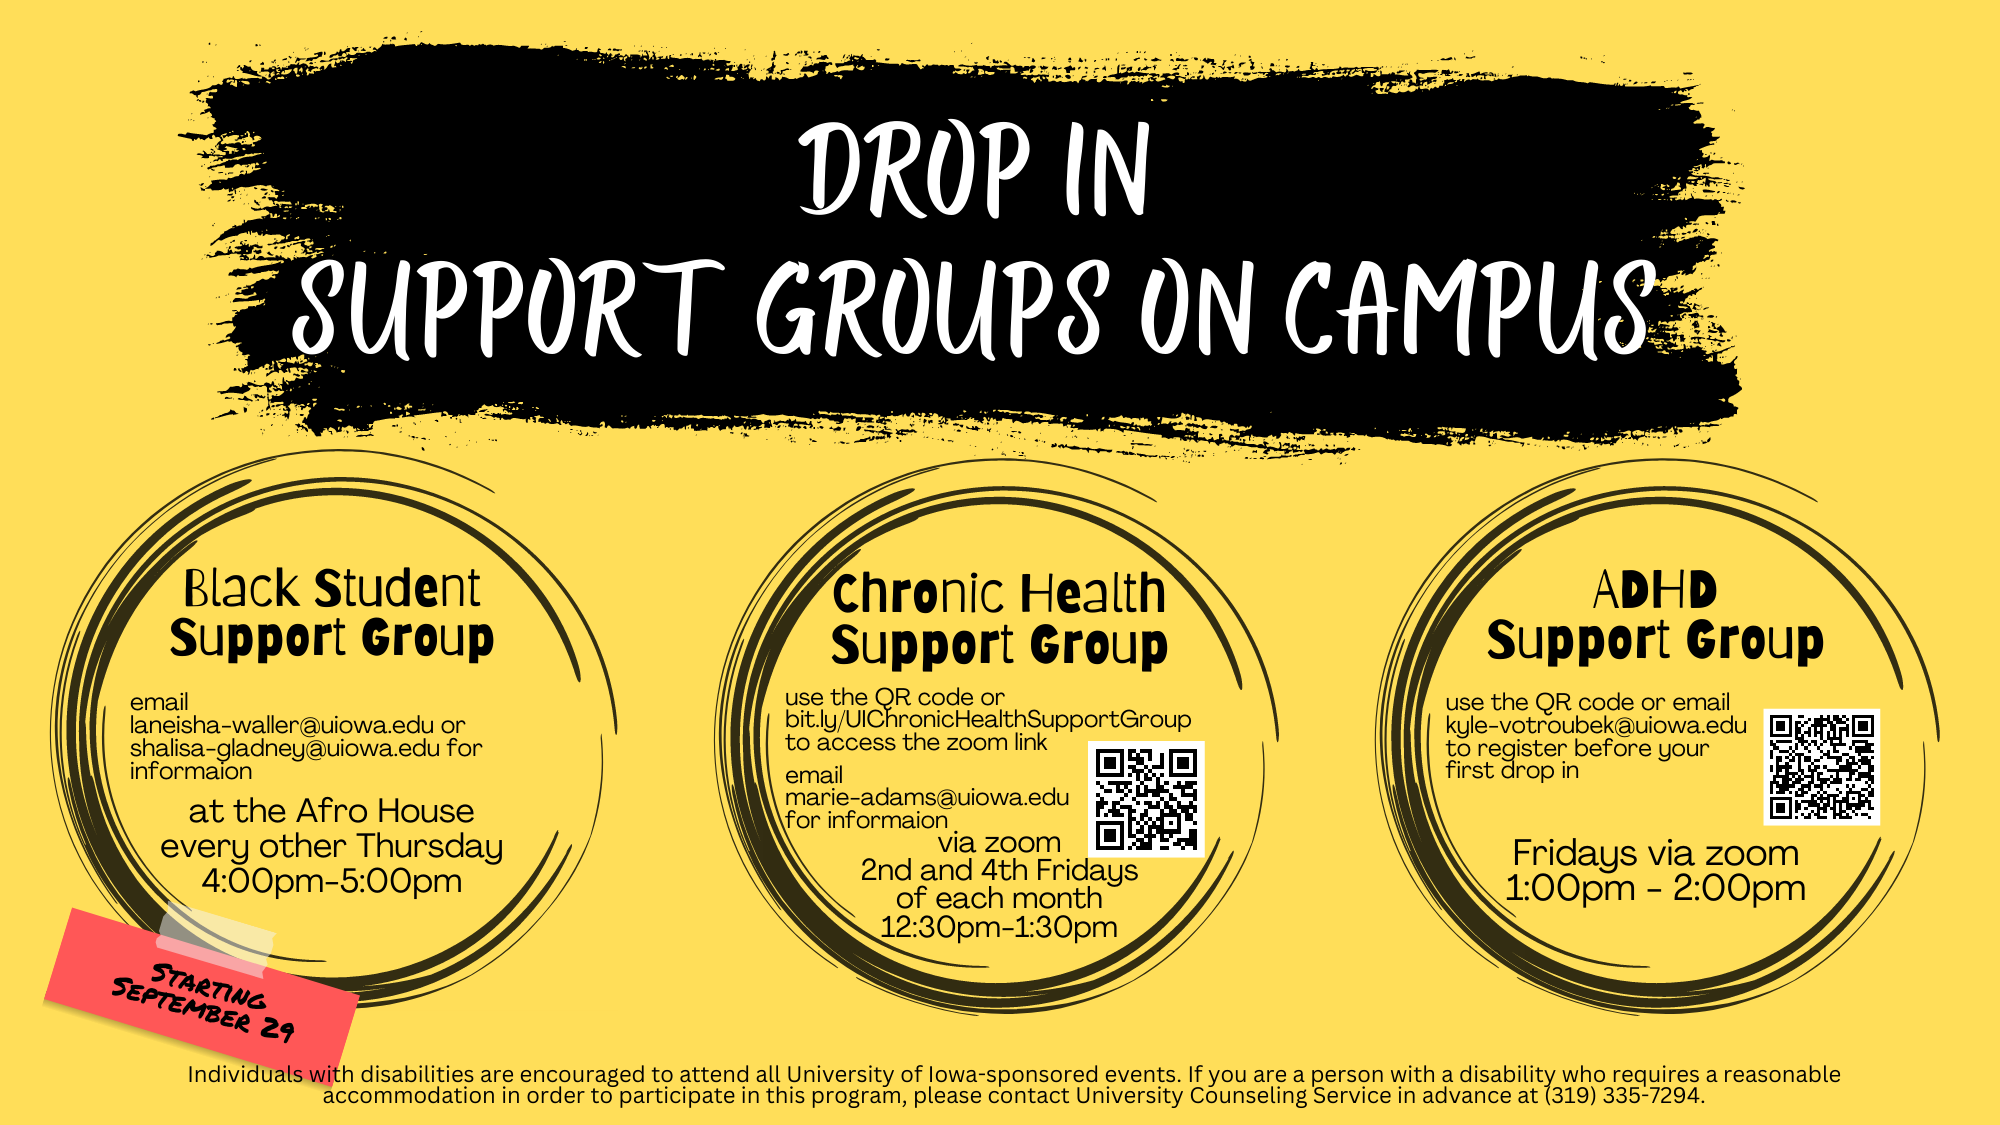 Image of Drop in support groups on campus including Black Student, Chronic Health, and ADHD